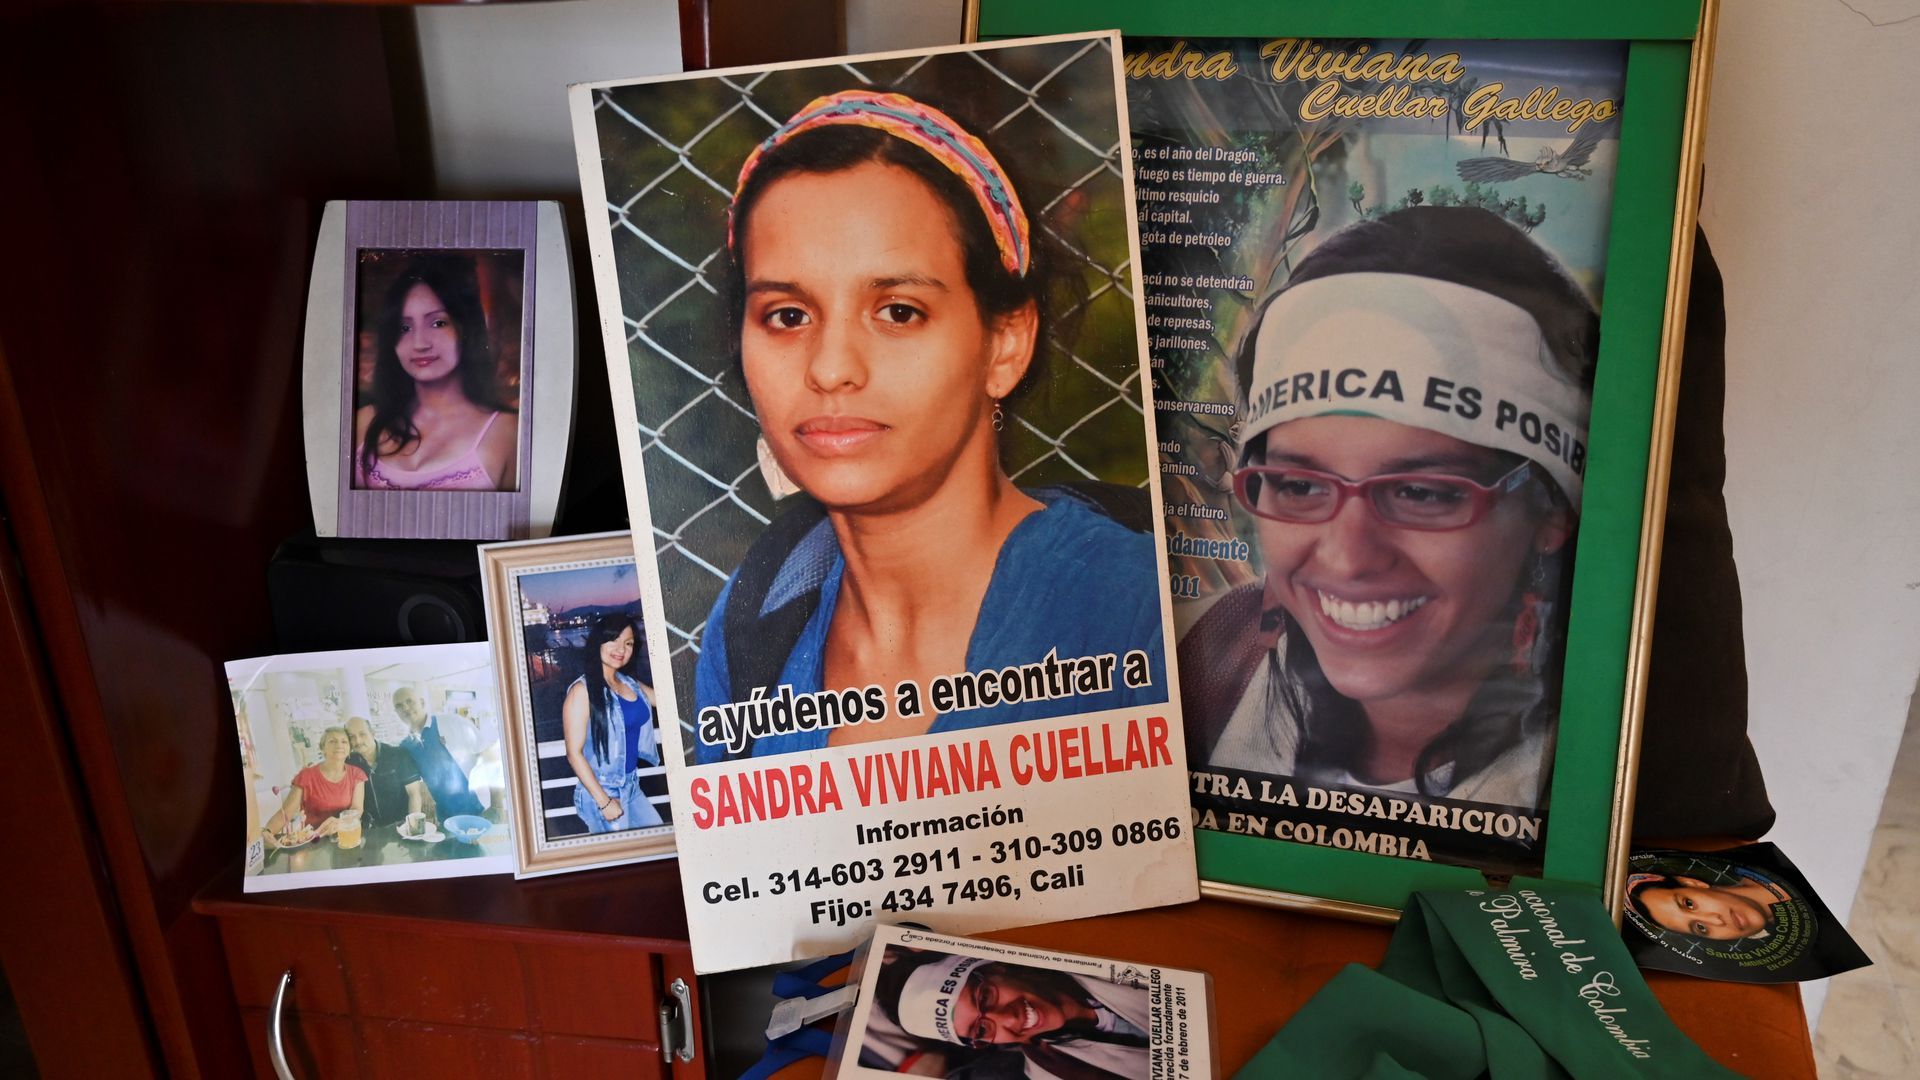 Engineer Sandra Cuéllar is one of many Colombians who've gone missing or been killed for their environmental activism.